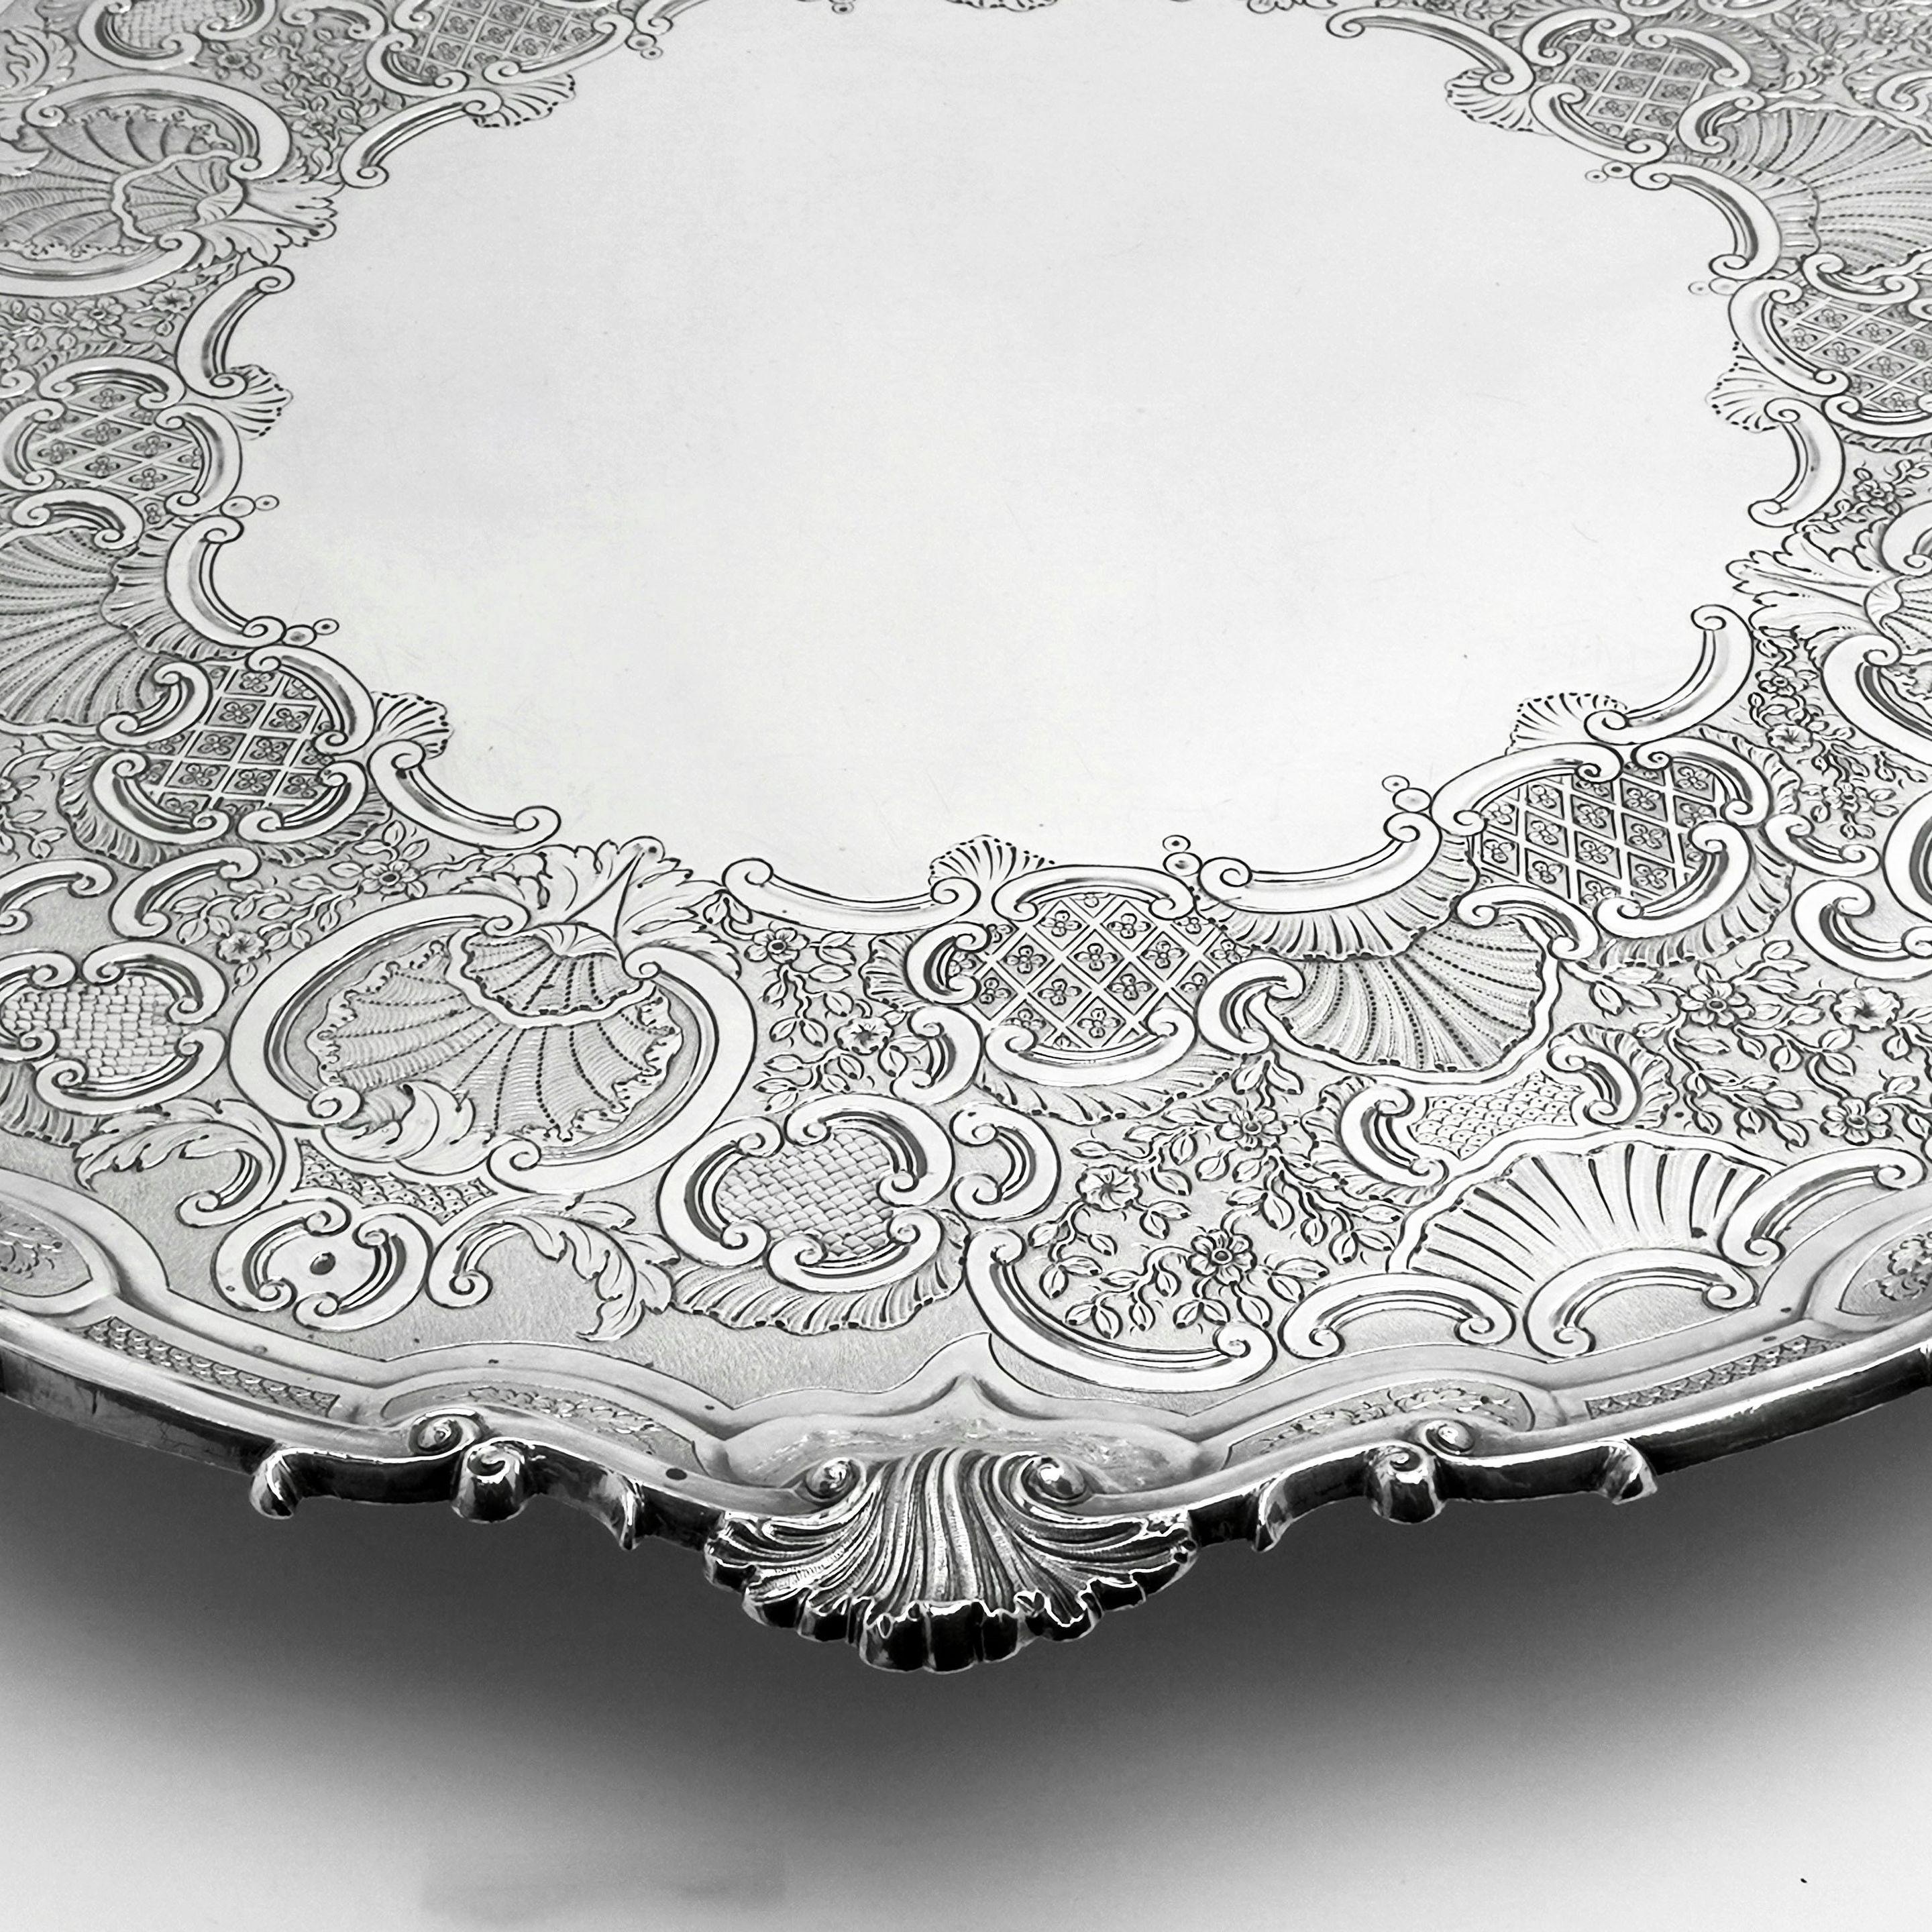 English Large Antique George III Georgian Sterling Silver Salver / Tray 1819 Platter